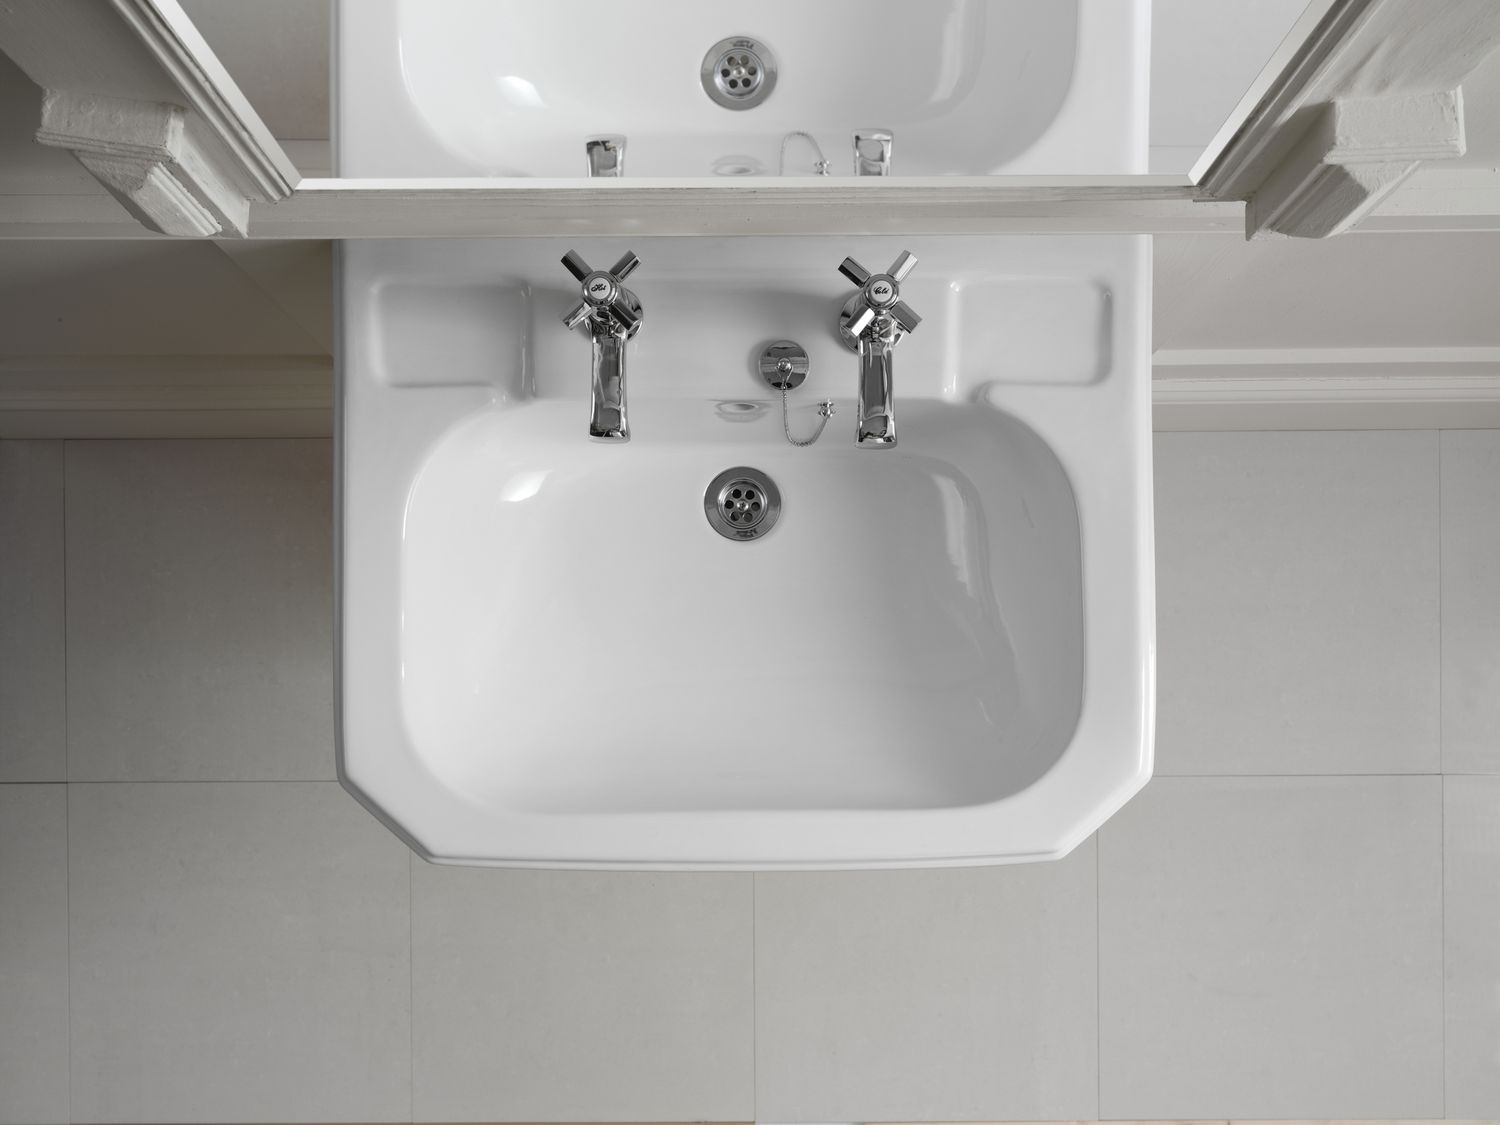 How To Install A Wall Mount Sink